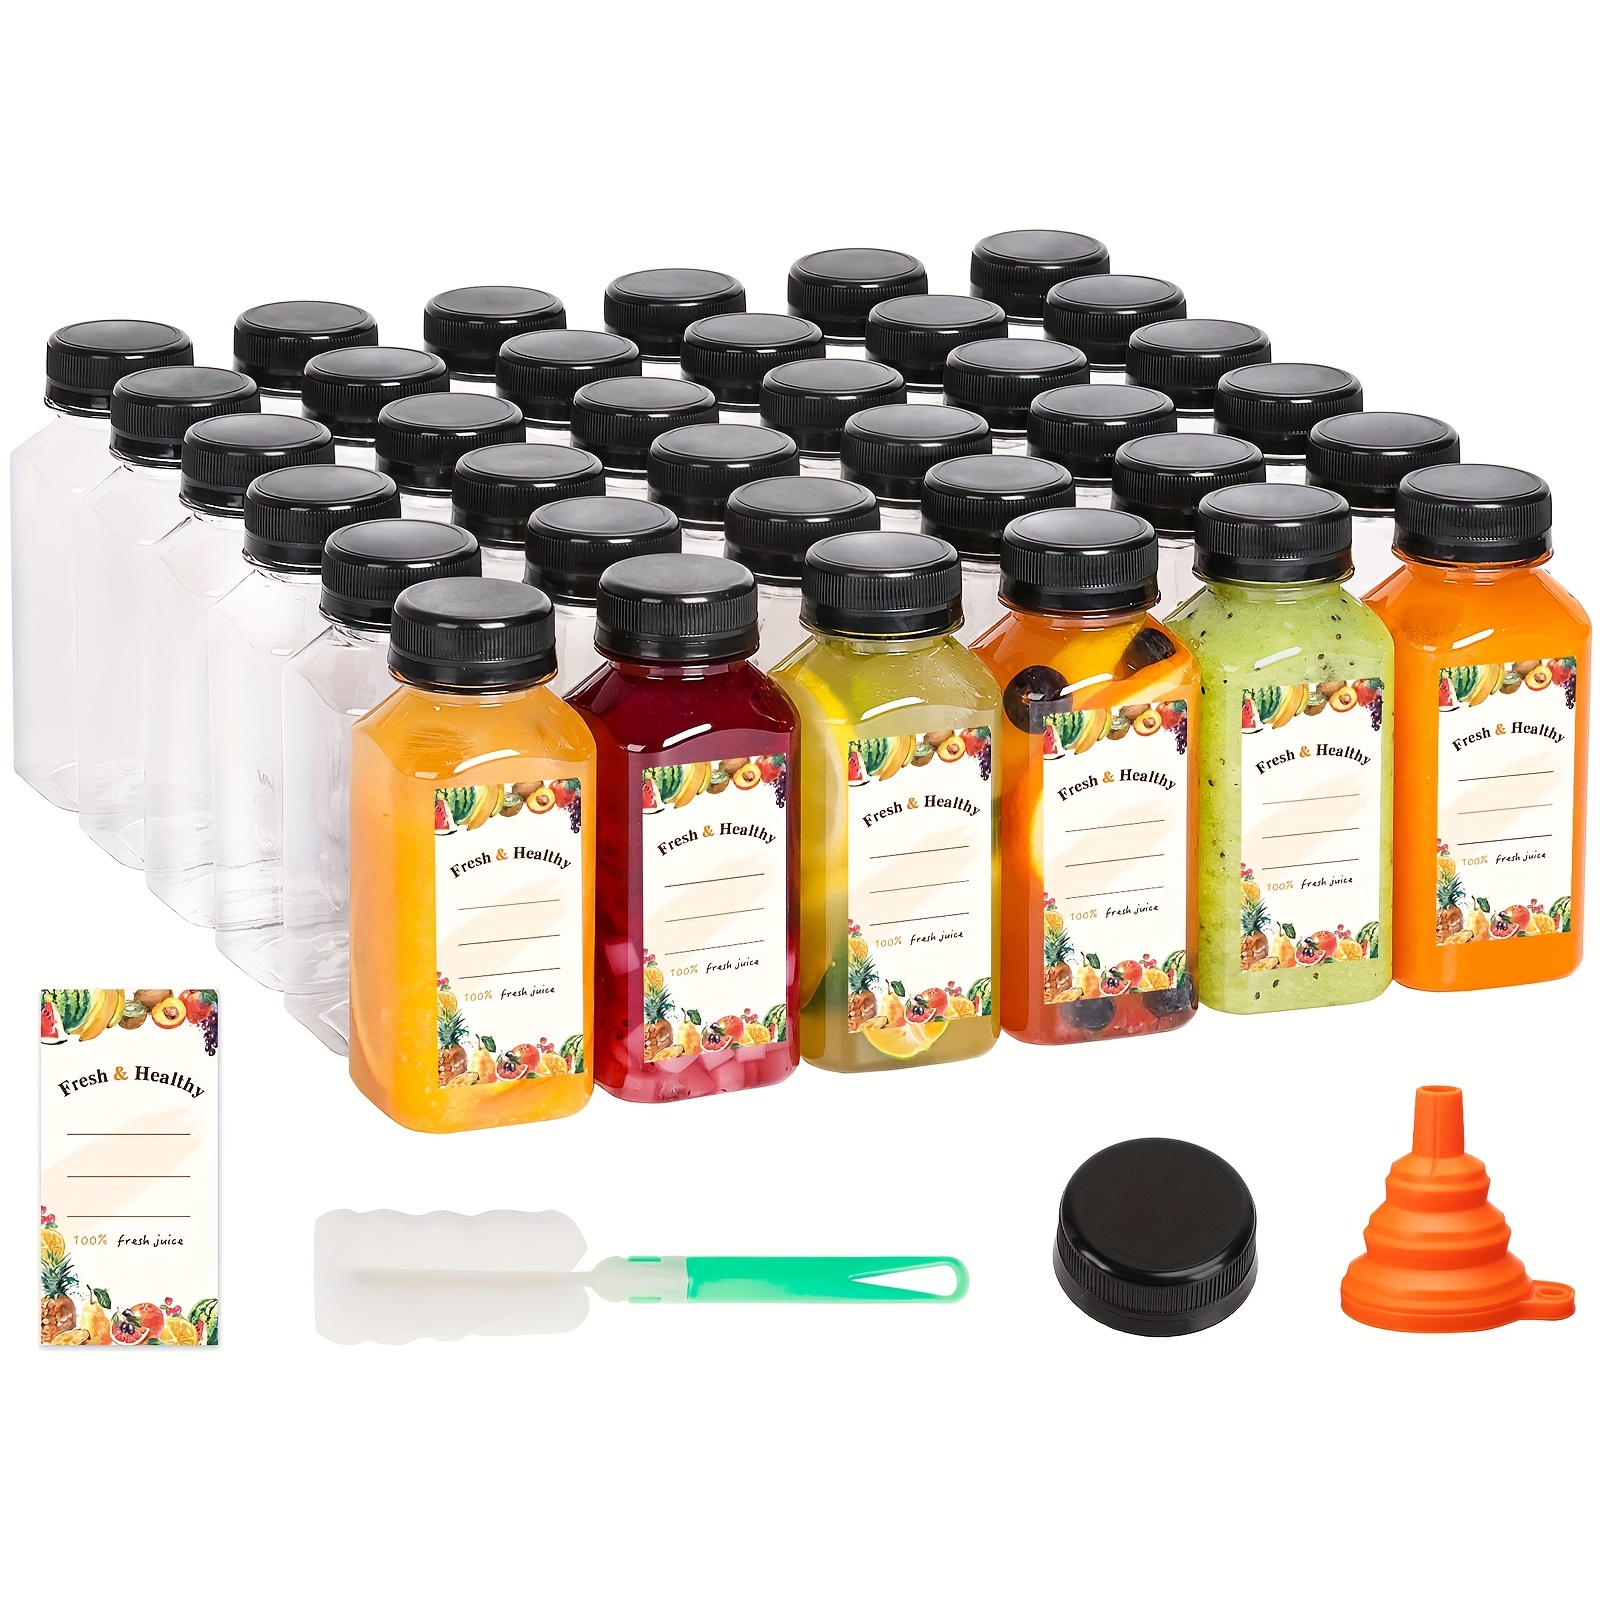 TOMNK 16 Pack 16oz Glass Juice Bottles with Lids and Straws Travel Drinking  Glass Bottles with Caps …See more TOMNK 16 Pack 16oz Glass Juice Bottles